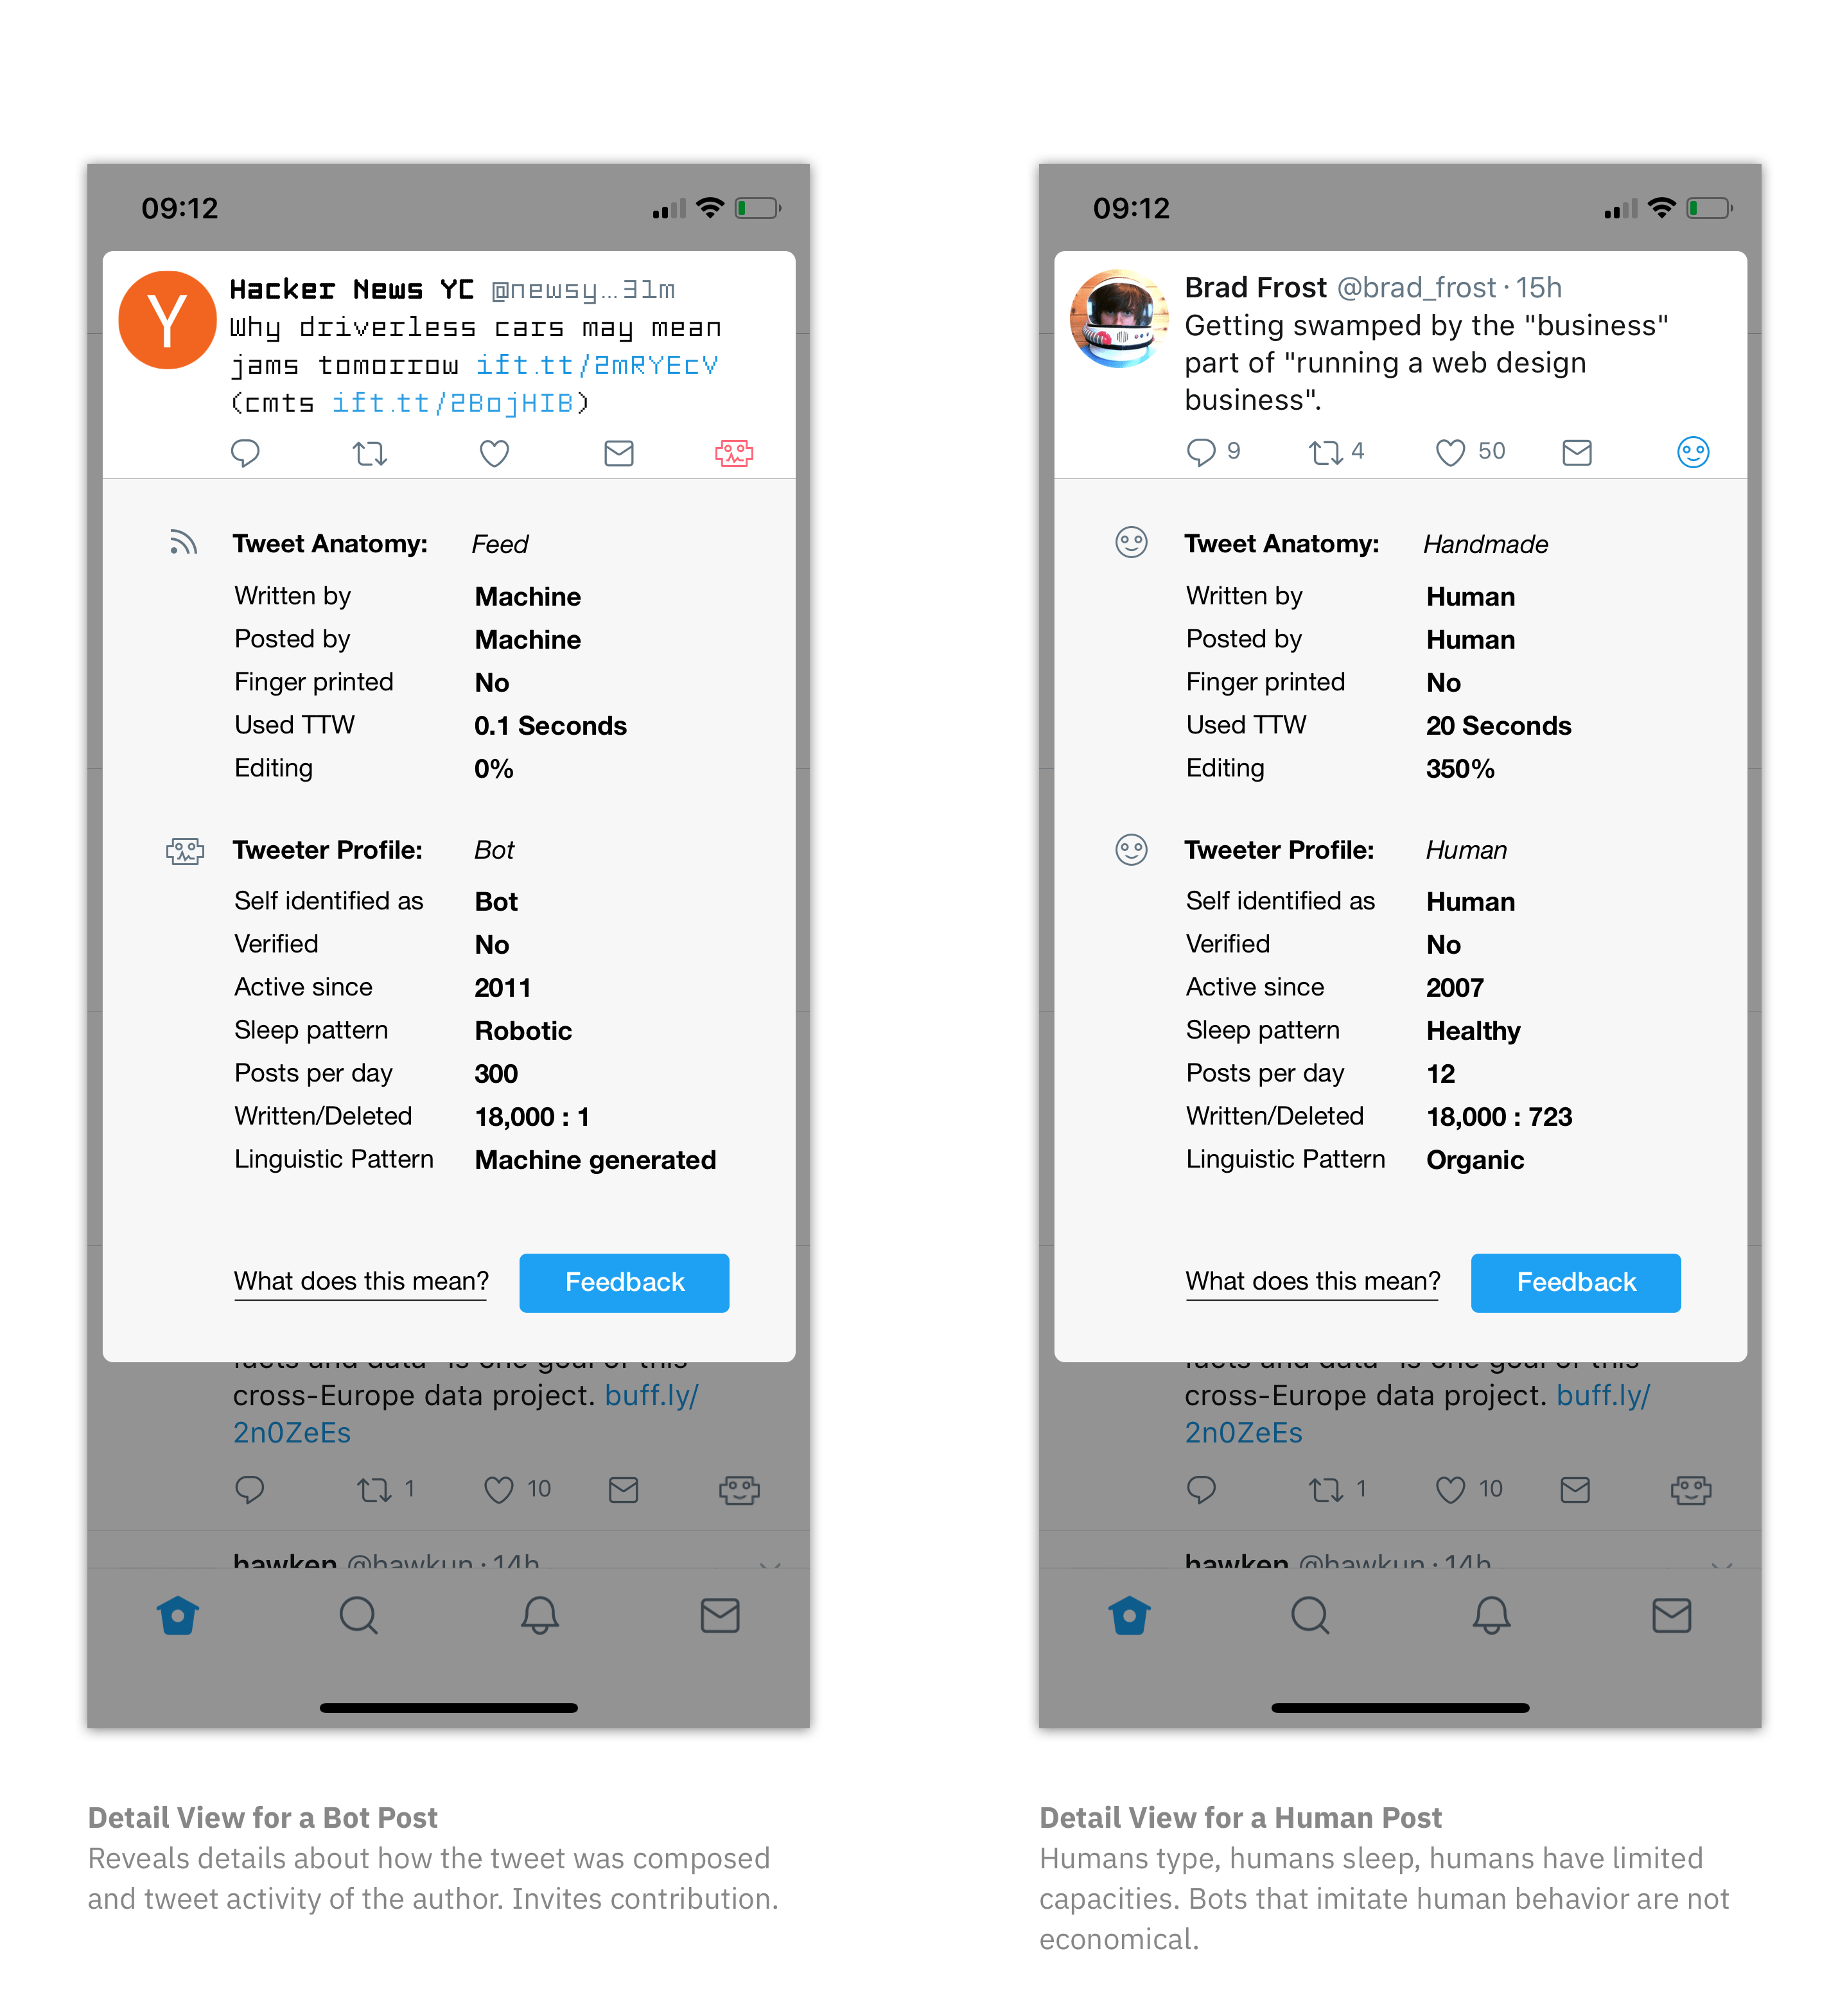 Detail View for a Bot Post versus Detail View for a Human Post (Reveals details about how the tweet was composed and tweet activity of the author.)